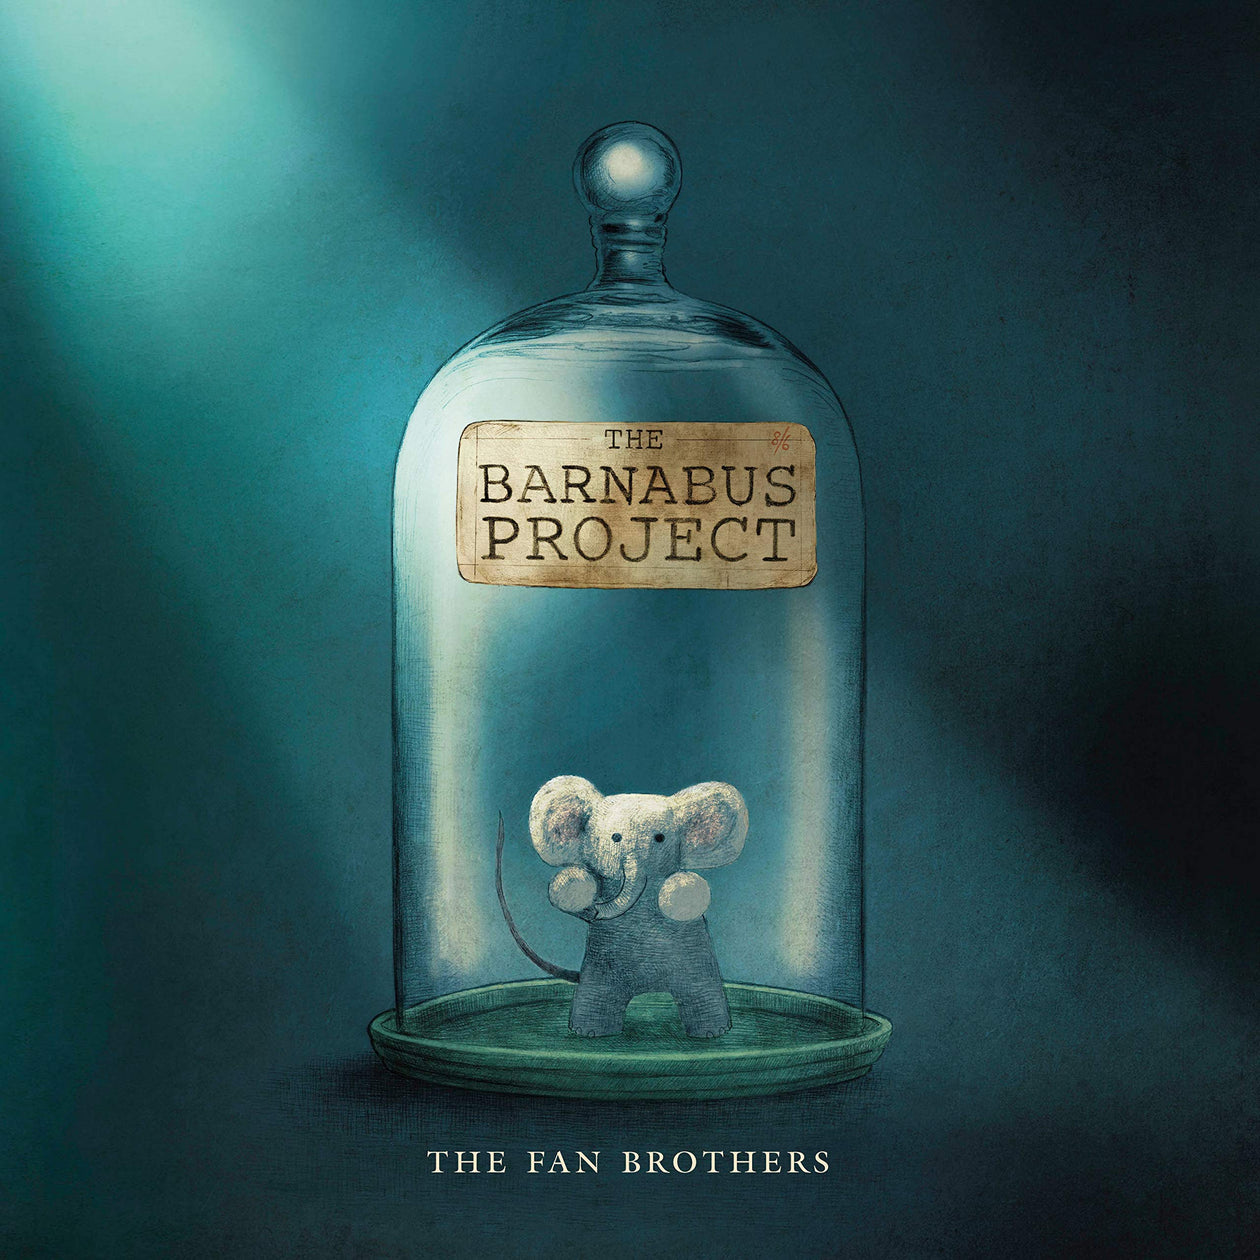 The Barnabus Project by The Fan Brothers